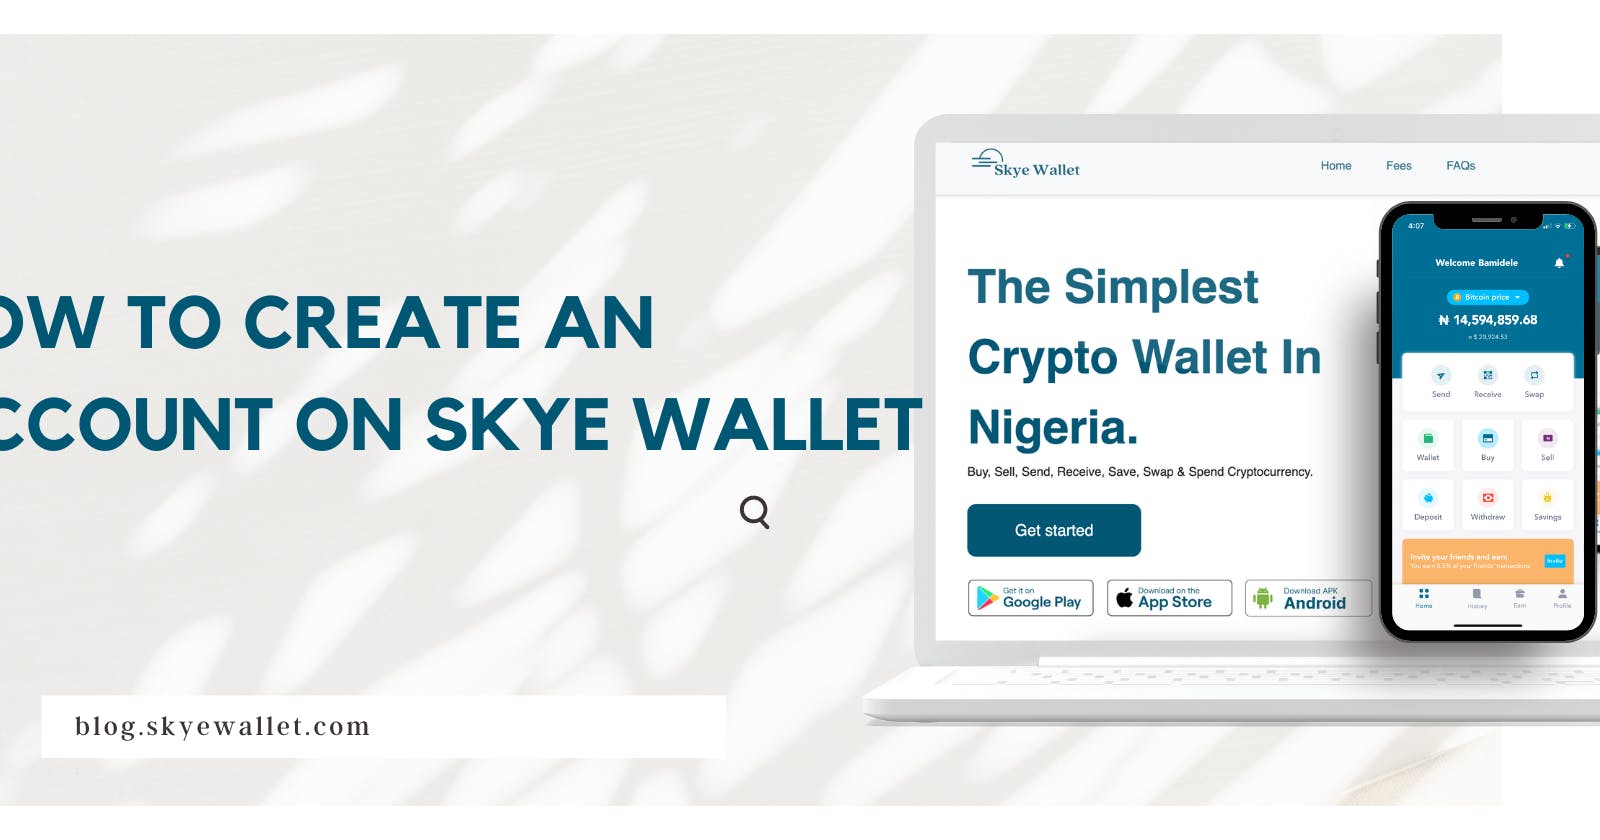 How To Create An Account On Skye Wallet